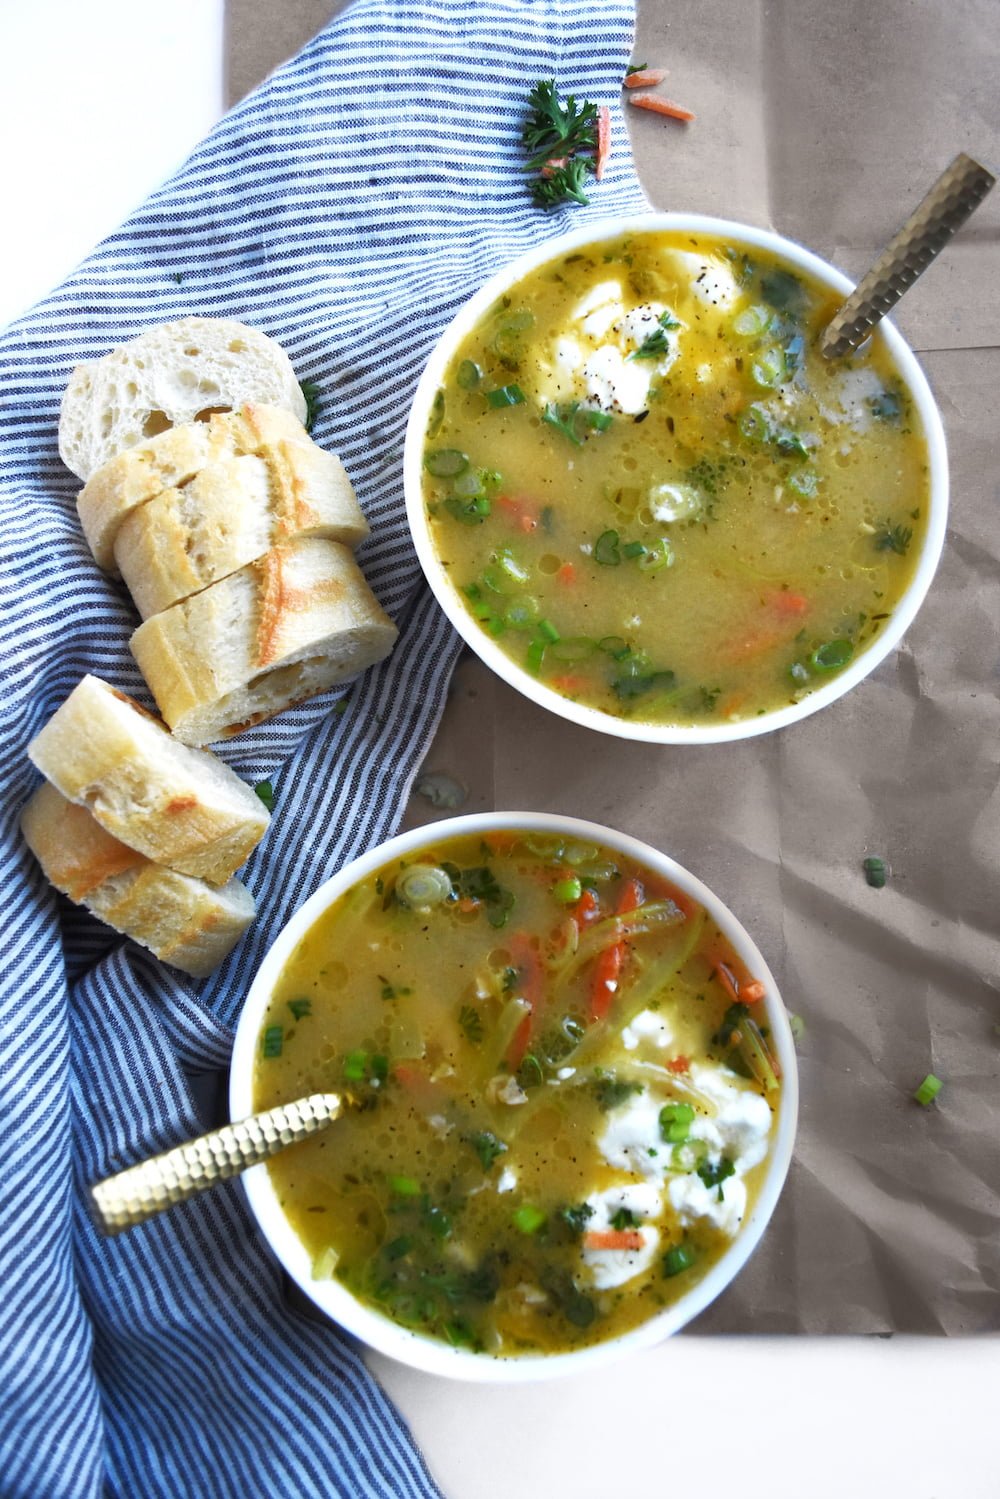 Made with roasted garlic, fresh herbs, scallions, and root vegetables, this Garlic Chicken Bone Broth Soup is a soothing, nourishing way to get all the benefits of bone broth.